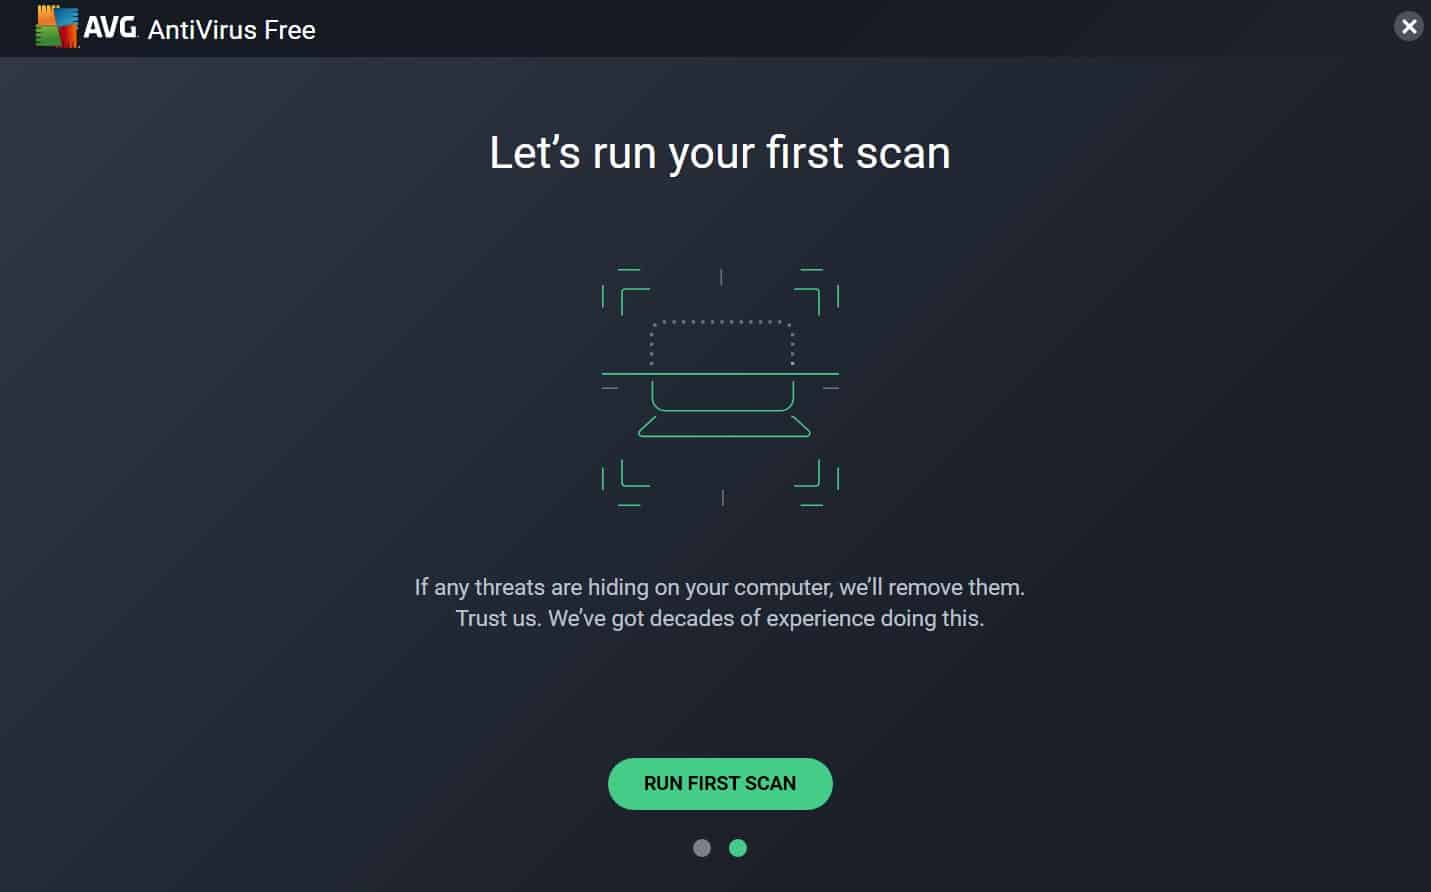 Run a virus scan on your computer using reliable antivirus software.
If any malware or viruses are detected, remove them completely.